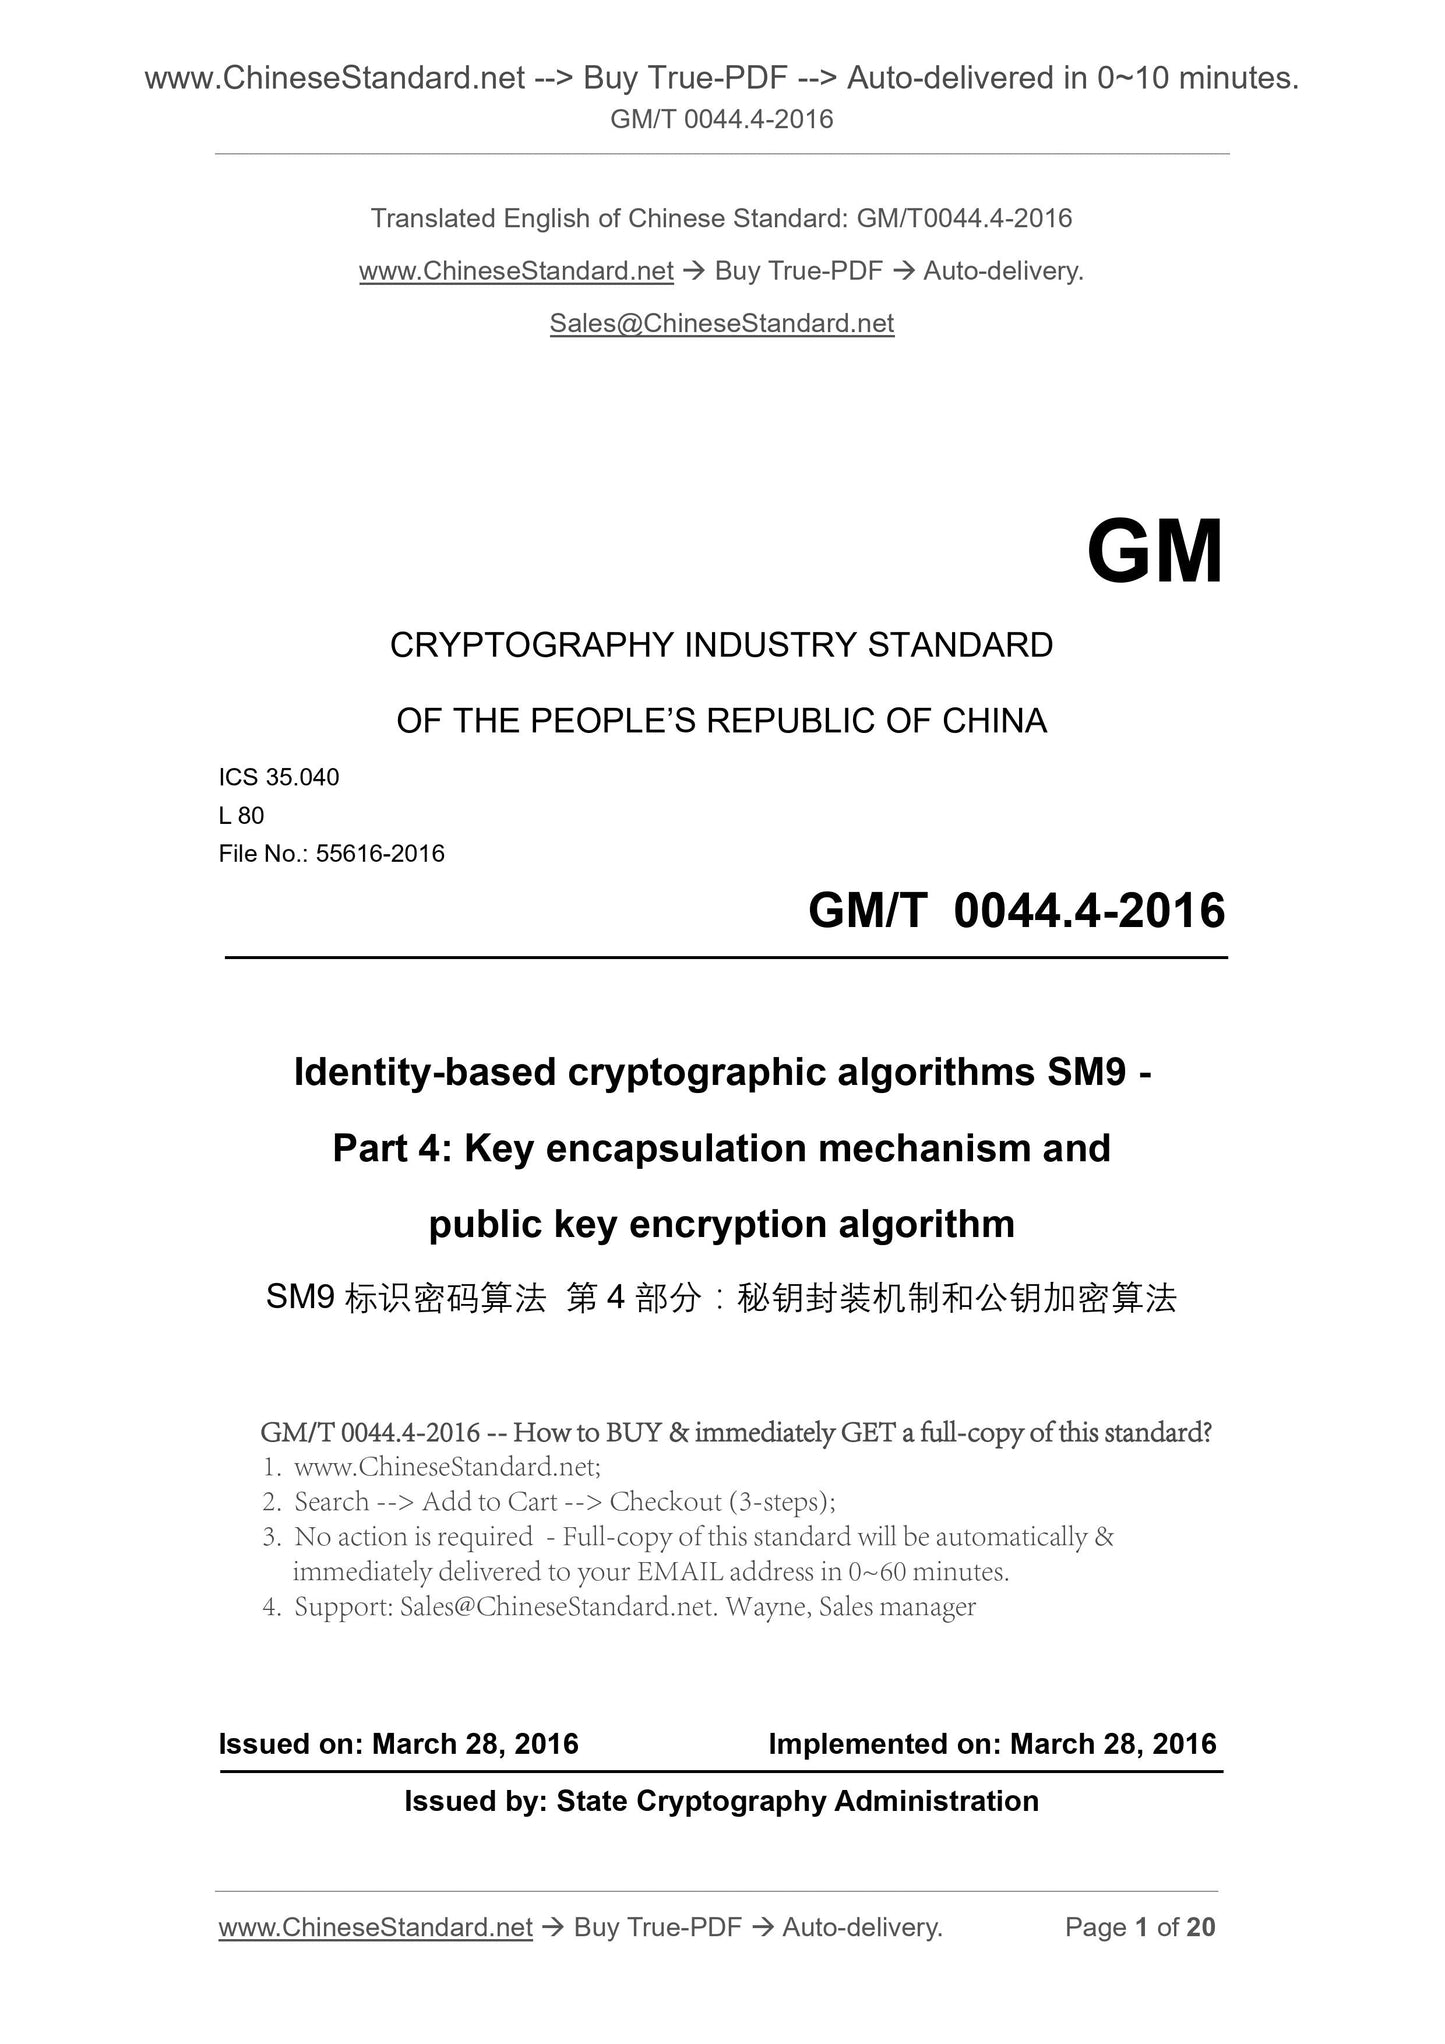 GM/T 0044.4-2016 Page 1